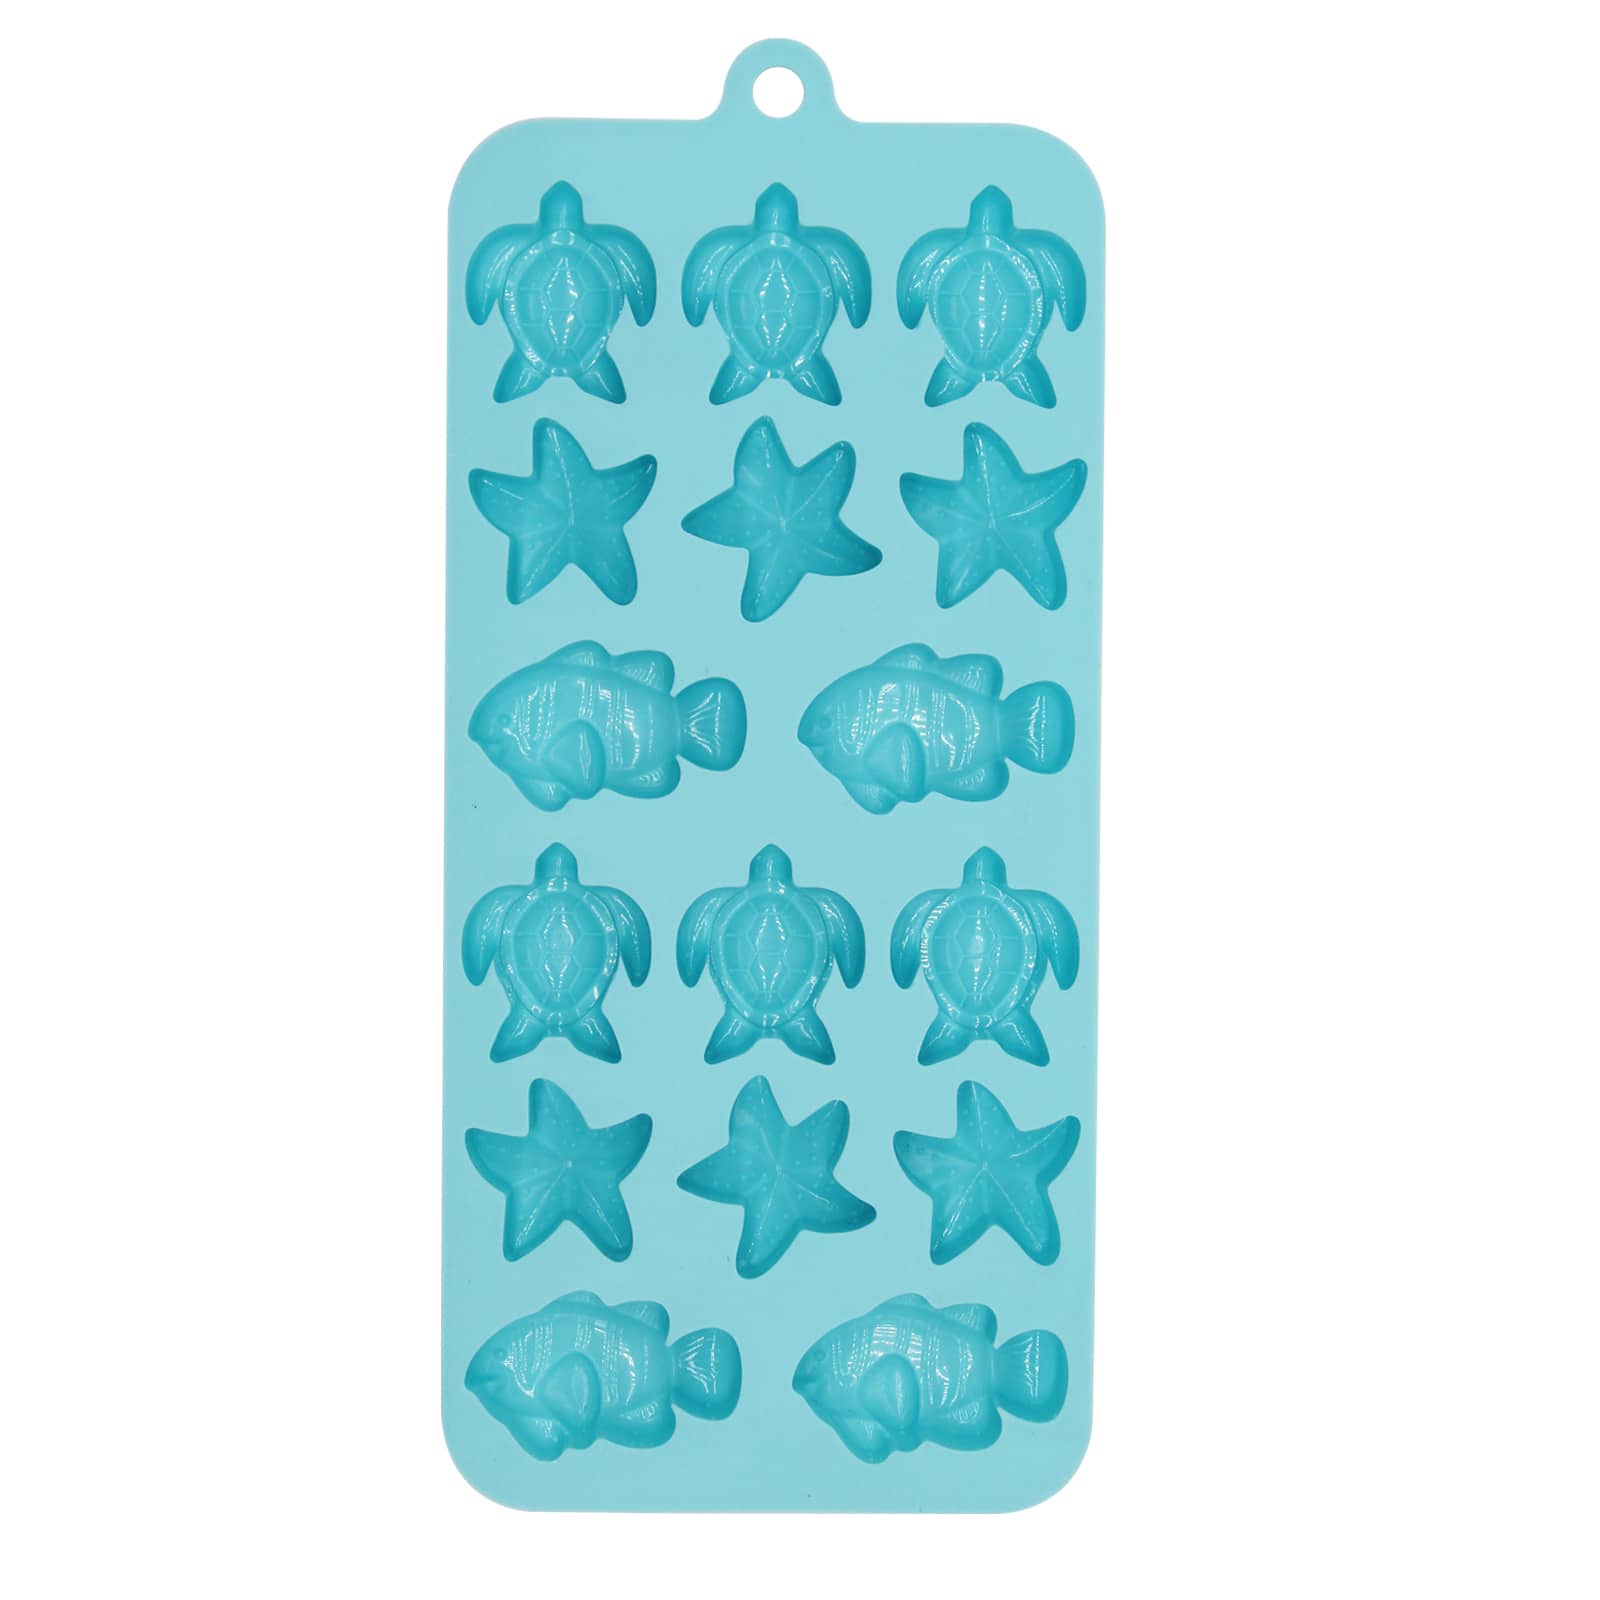 6 Pack: Ocean Silicone Candy Mold by Celebrate It&#xAE;